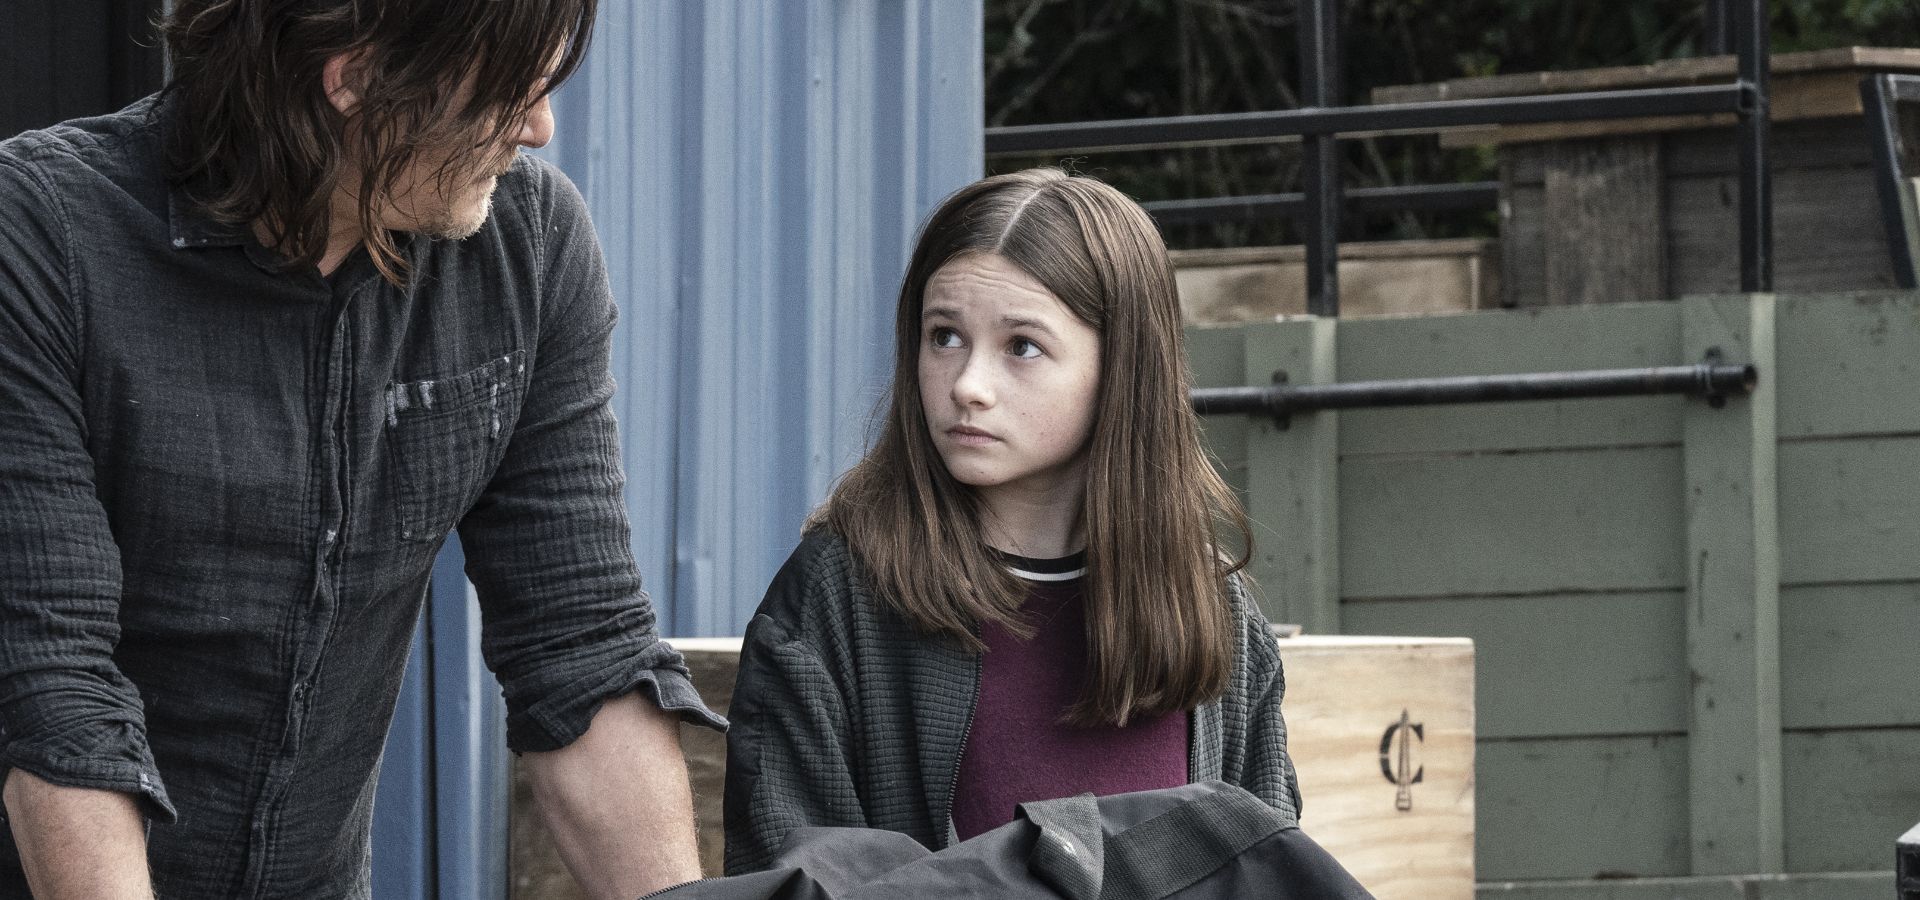 The Walking Dead Q&A — Cailey Fleming Describes Her Reaction To Discovering Judith Gets Shot 